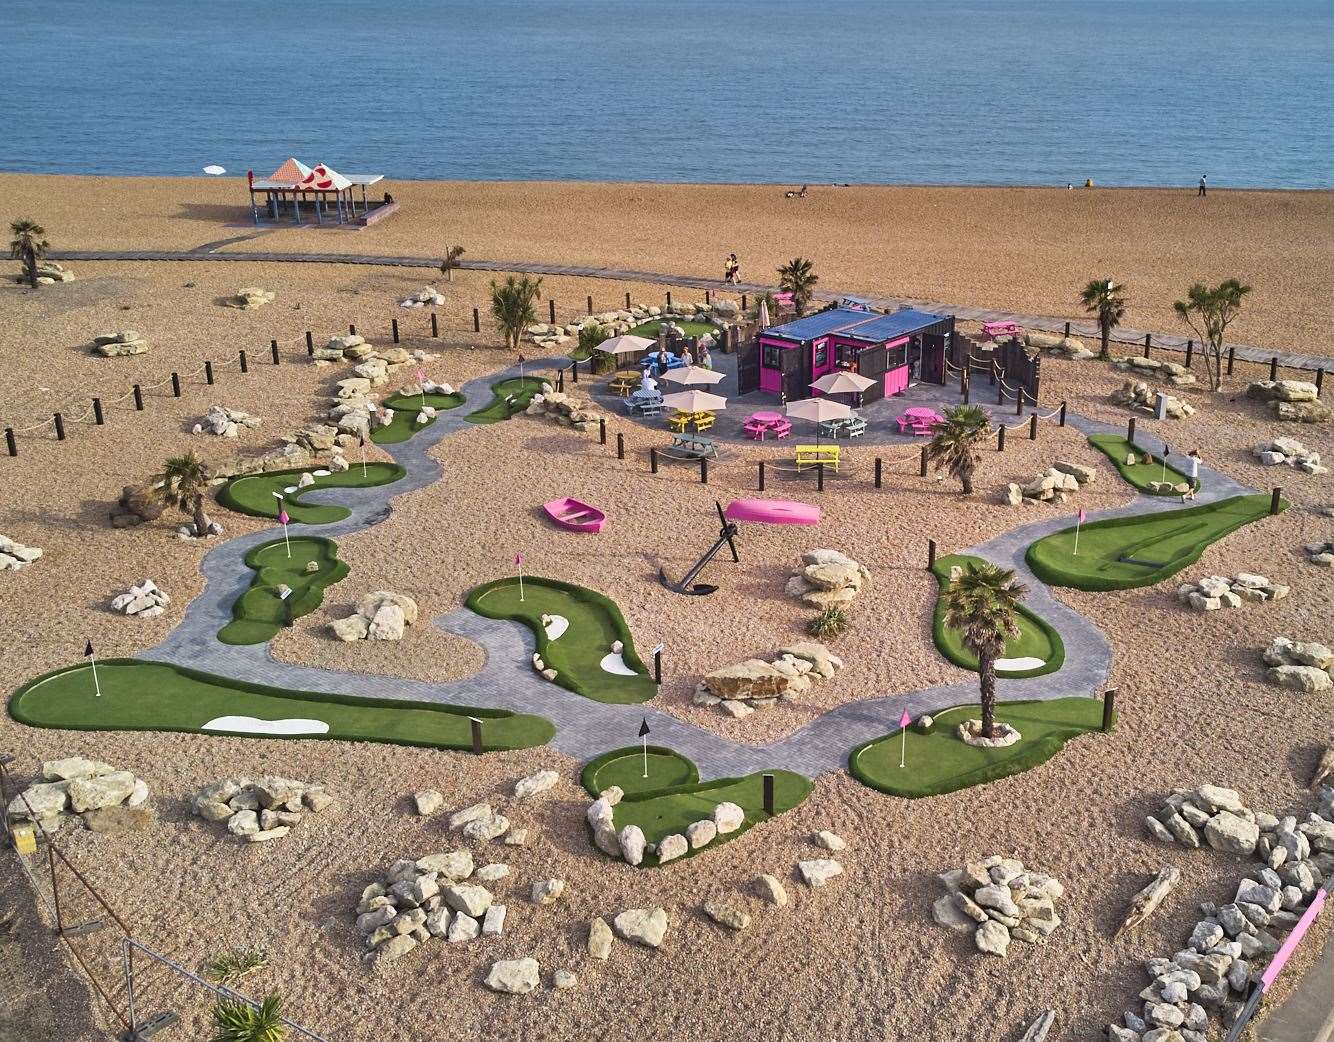 Putters golf course on the beach in Folkestone. Picture: Matt Rowe